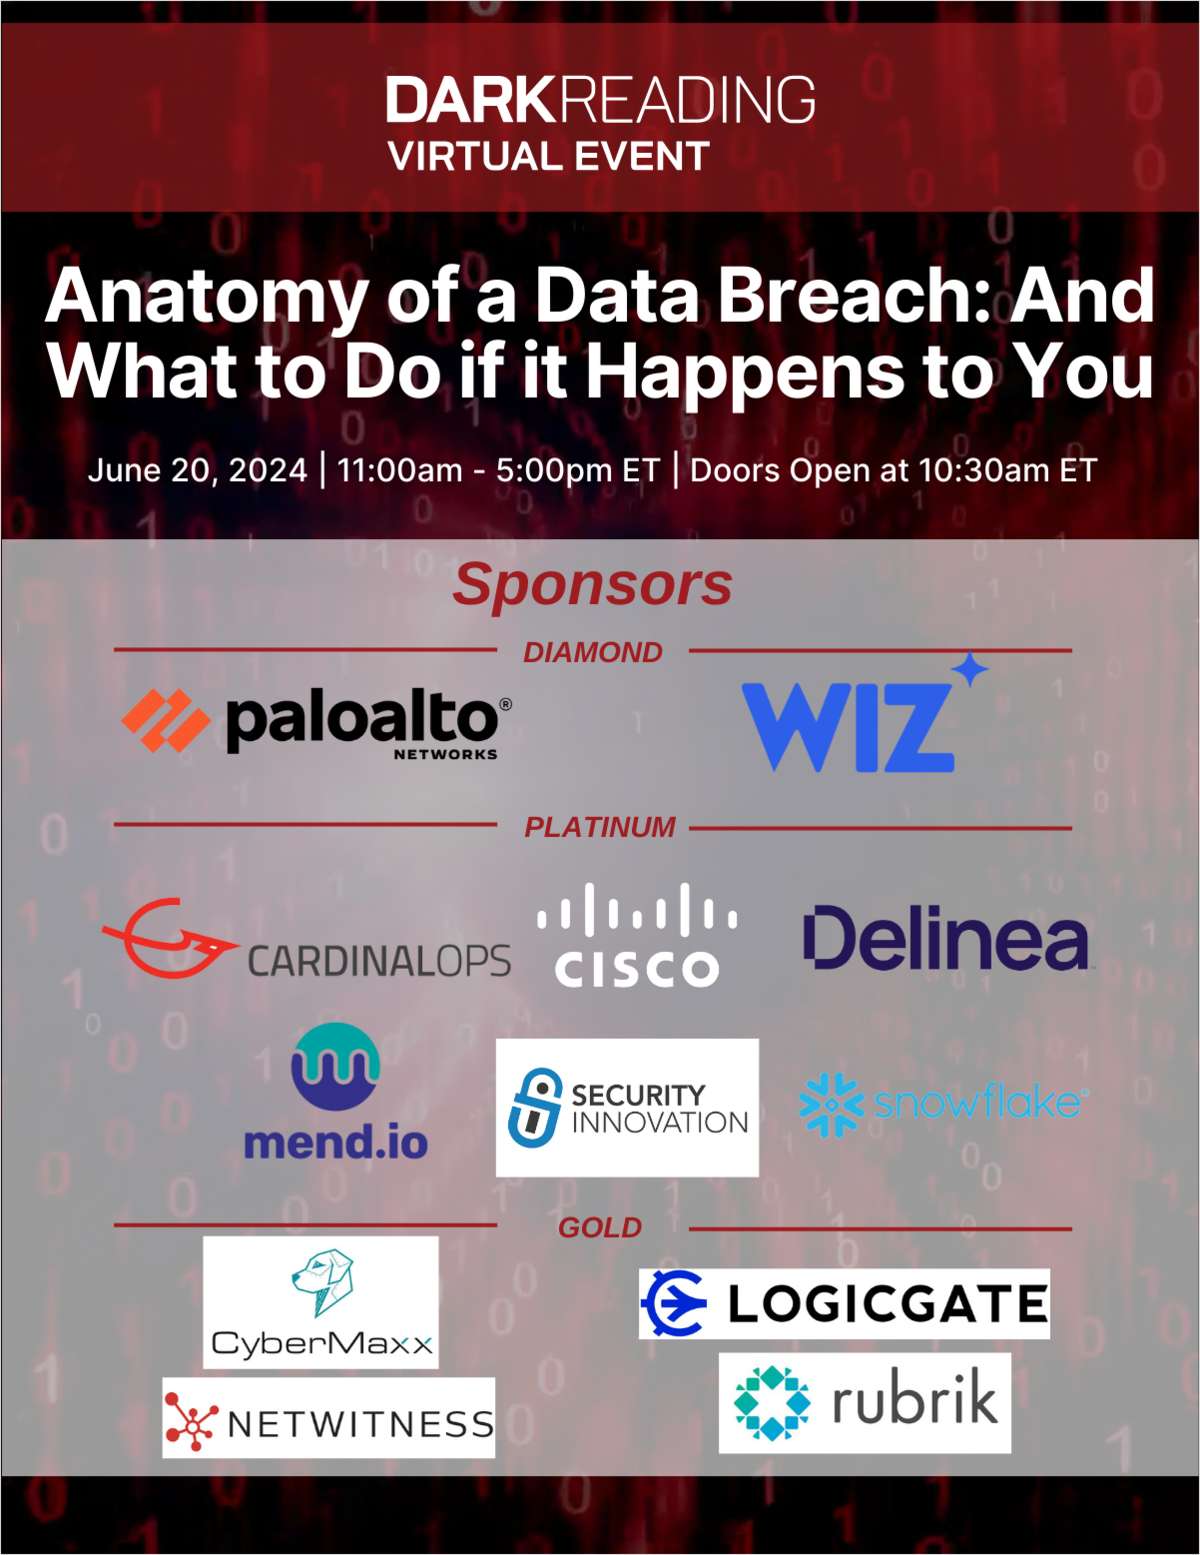 Anatomy of a Data Breach: And What to Do if it Happens to You